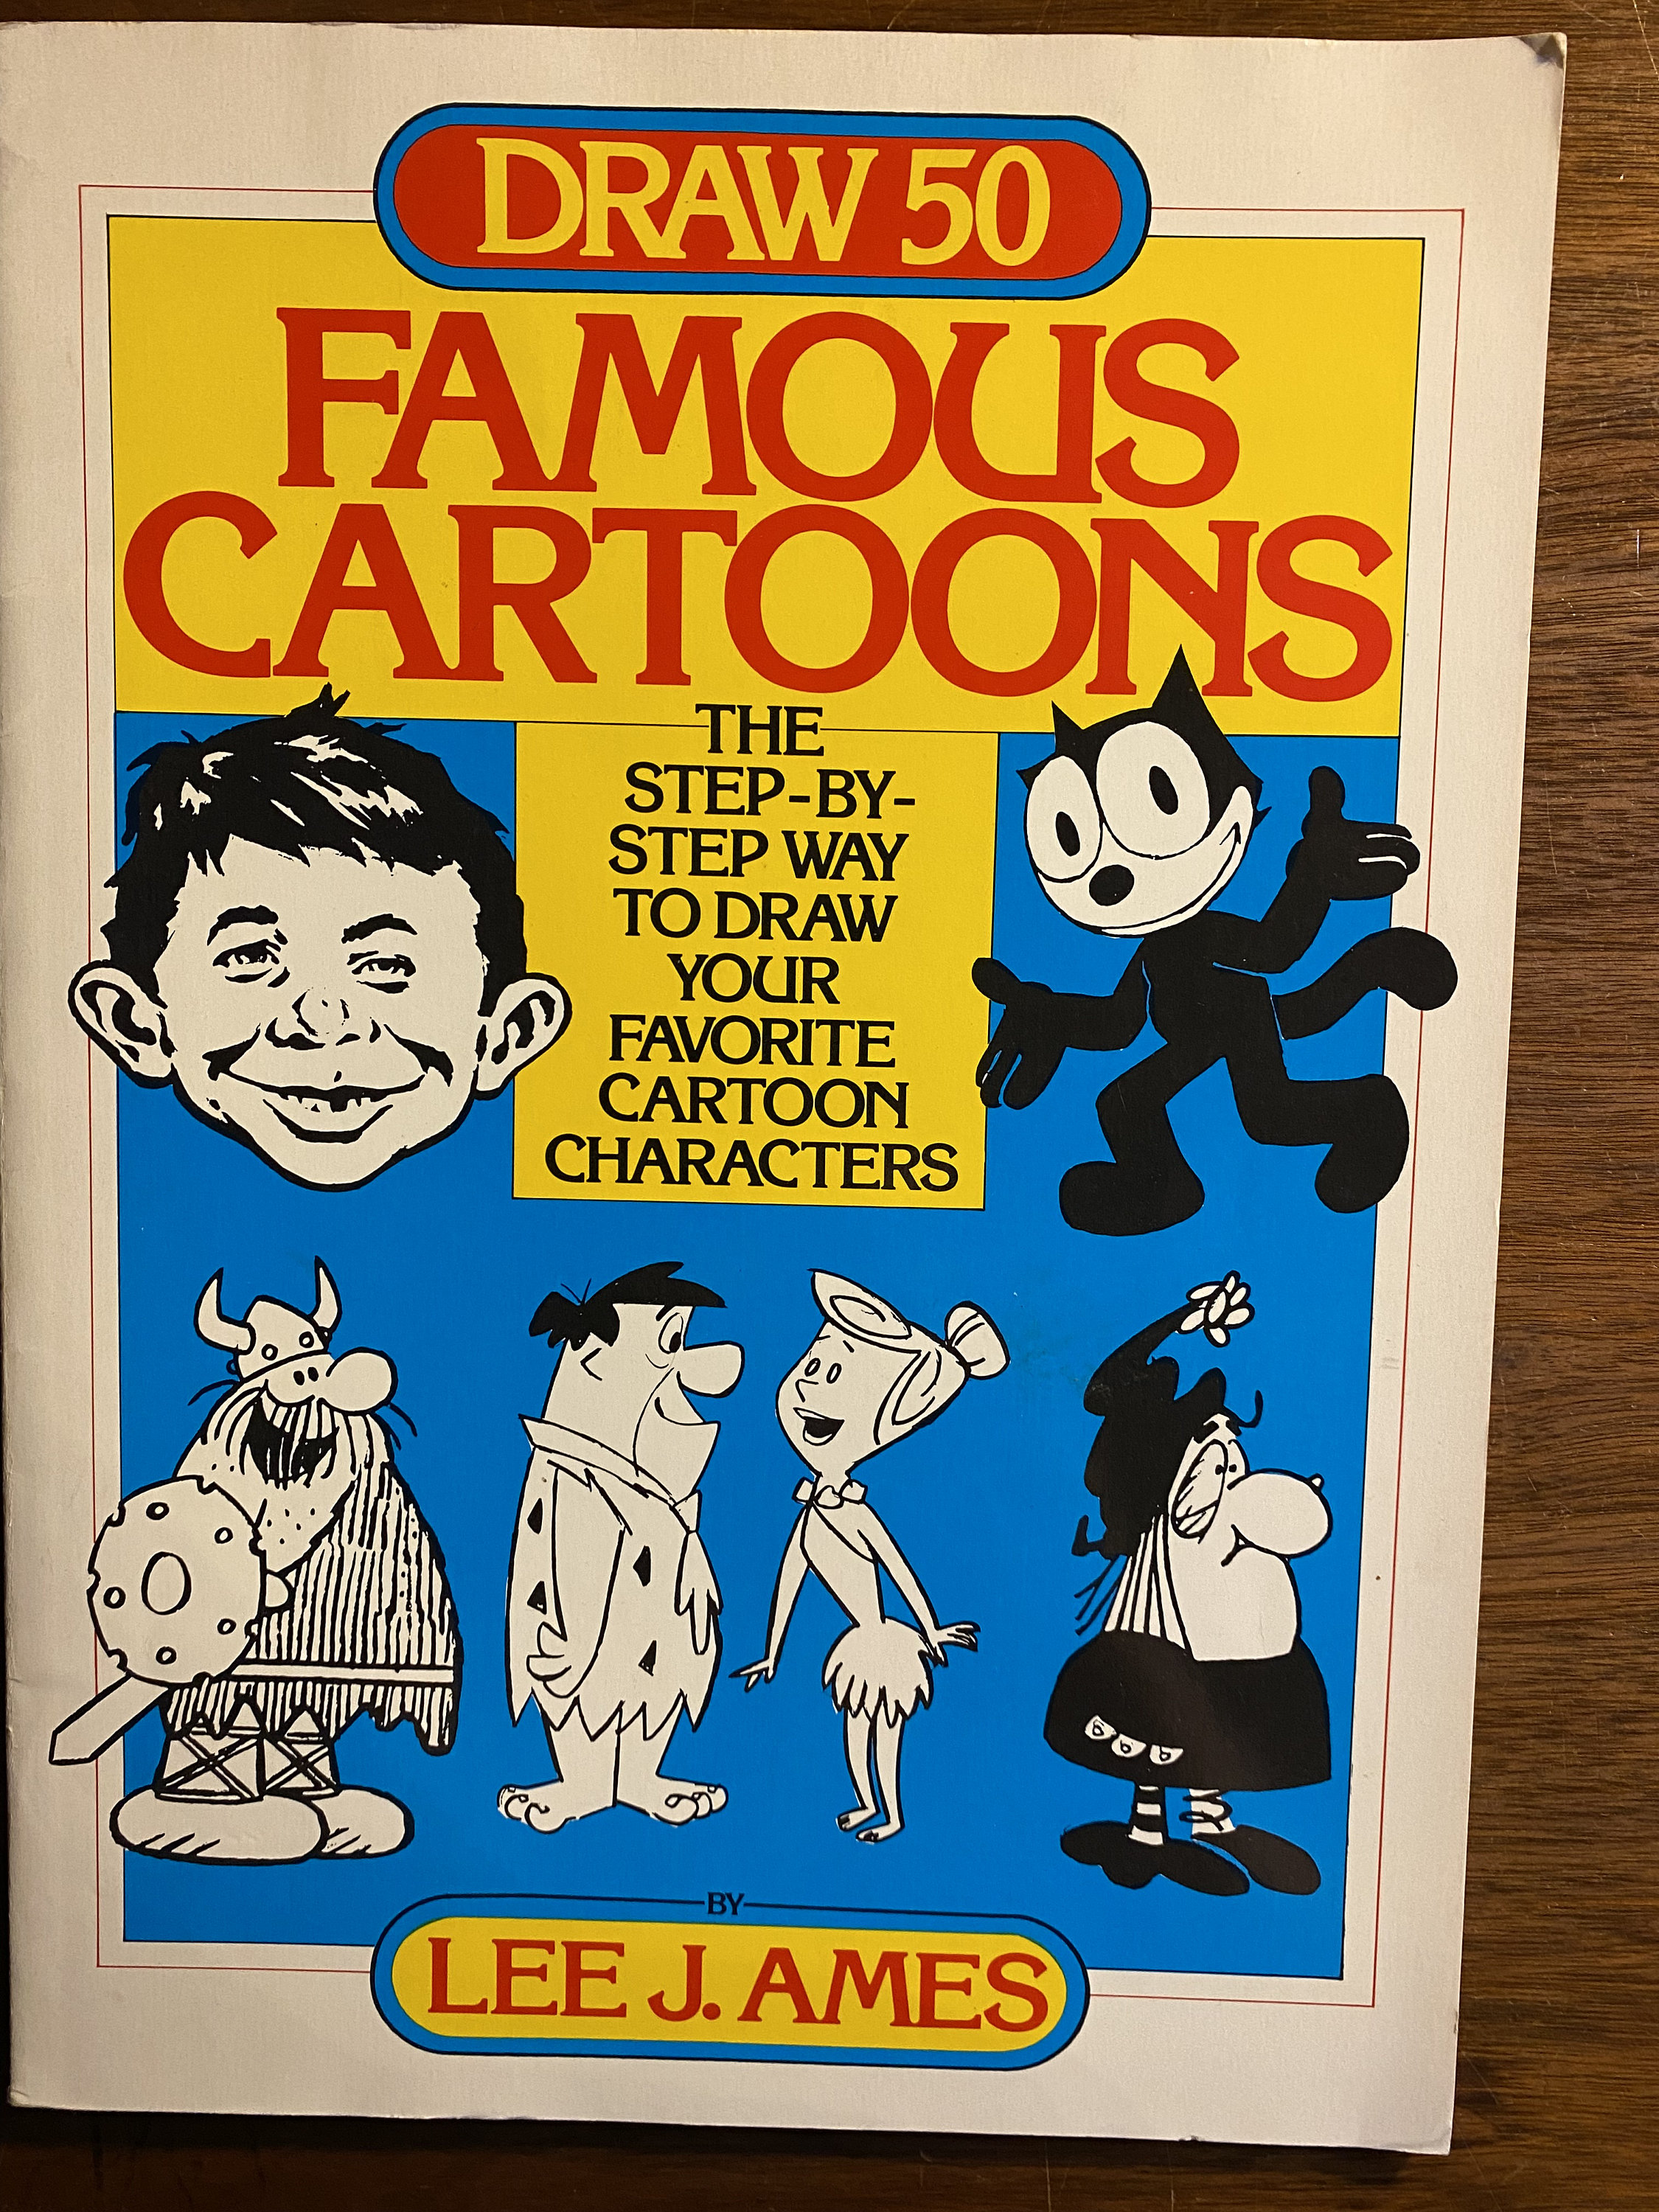 Draw 50 Famous Cartoons How to Lee Ames Art Instruction - Etsy